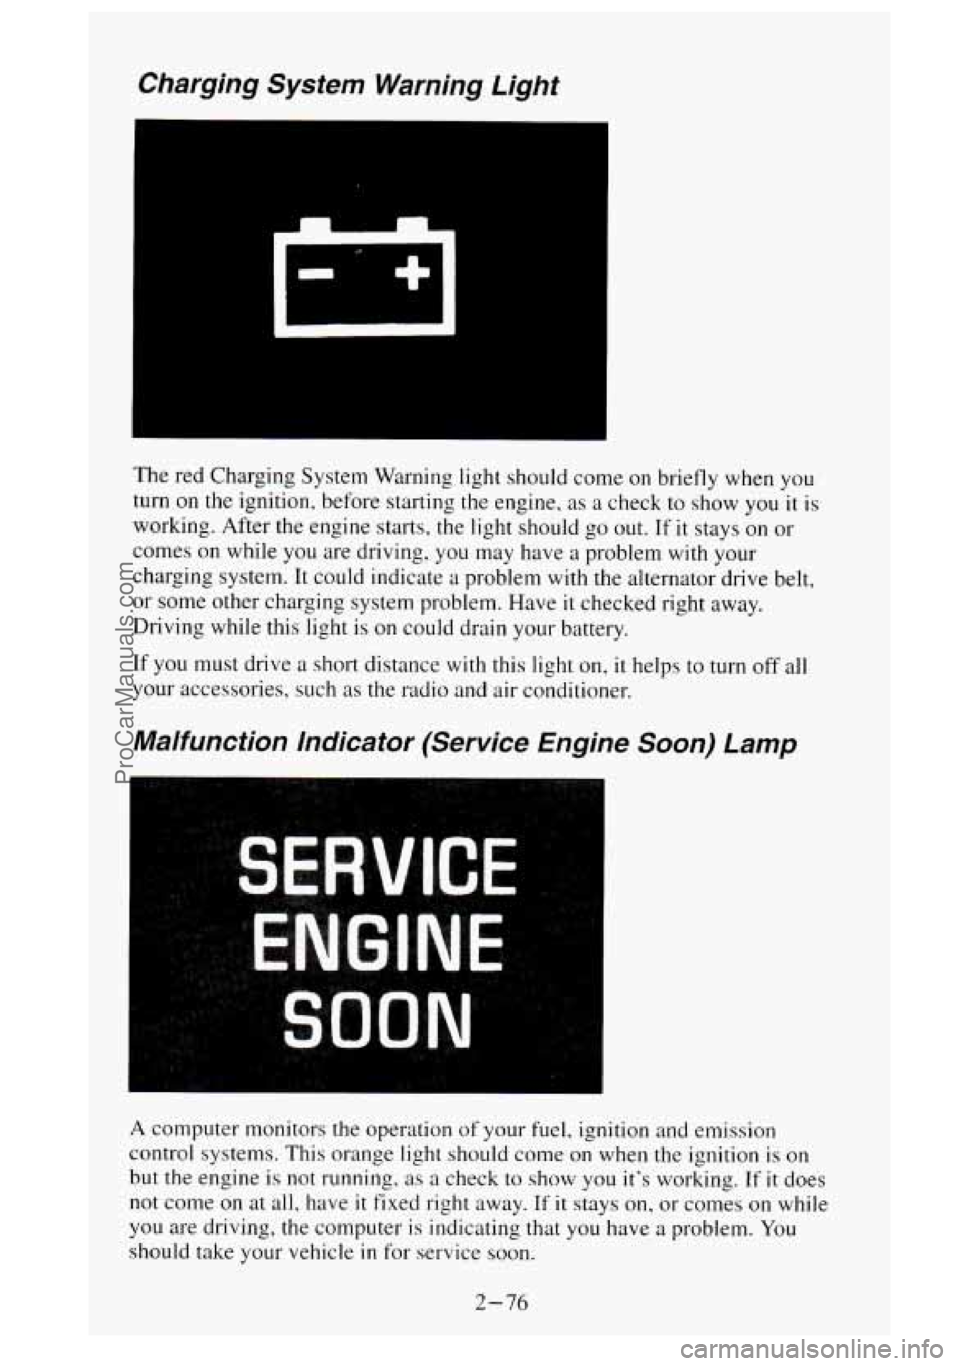 GMC SIERRA 1995  Owners Manual Charging  System  Warning  Light 
The red Charging System Warning  light should  come on briefly when  you 
turn on 
the ignition, before starting the  engine, as a check  to show  you it is 
working.